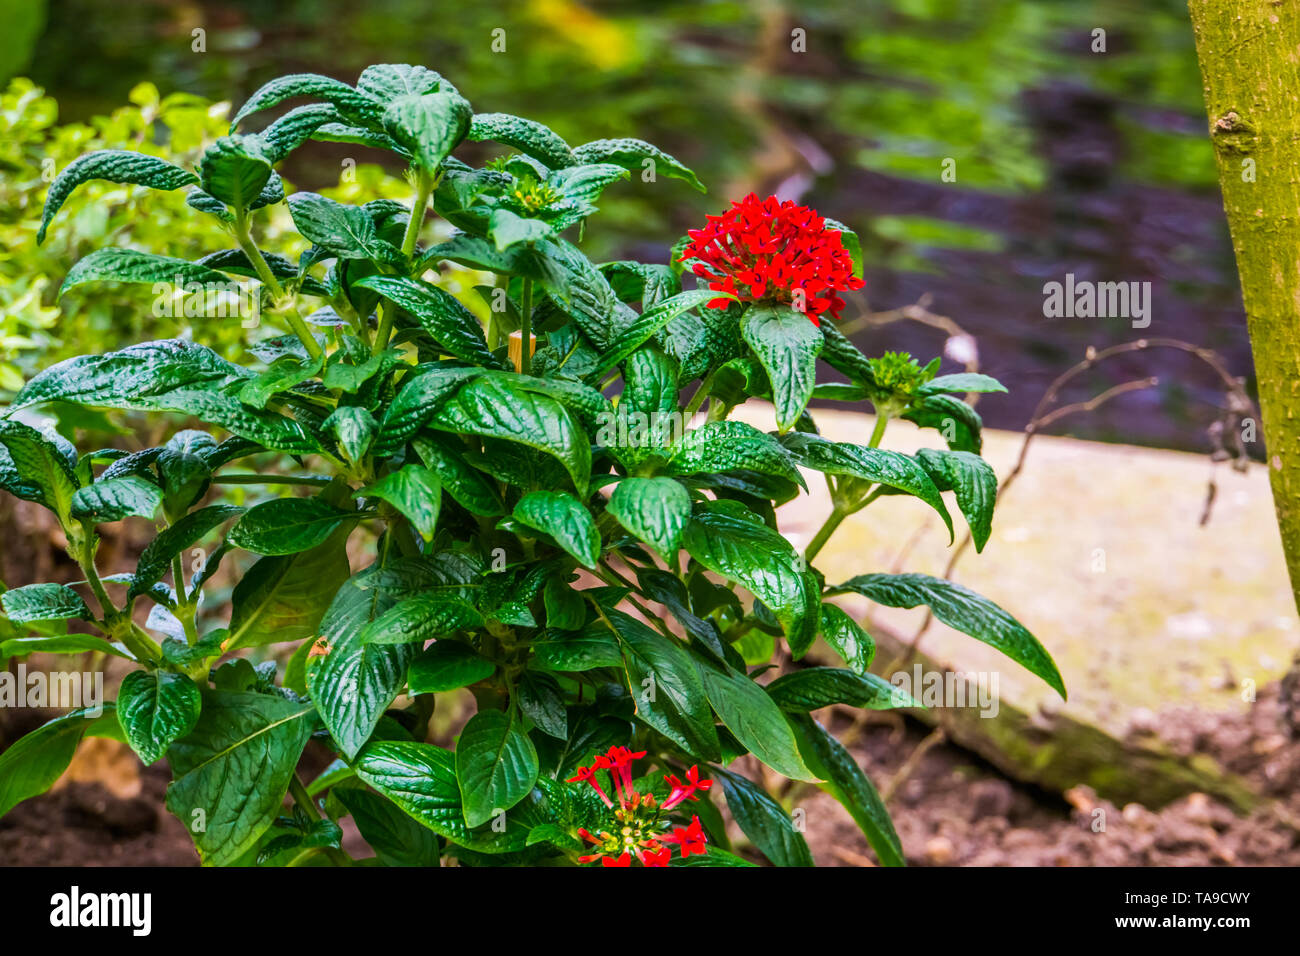 Red clustered flowers on a pentas plant, popular tropical plant from Africa, ornamental flowering garden plants Stock Photo